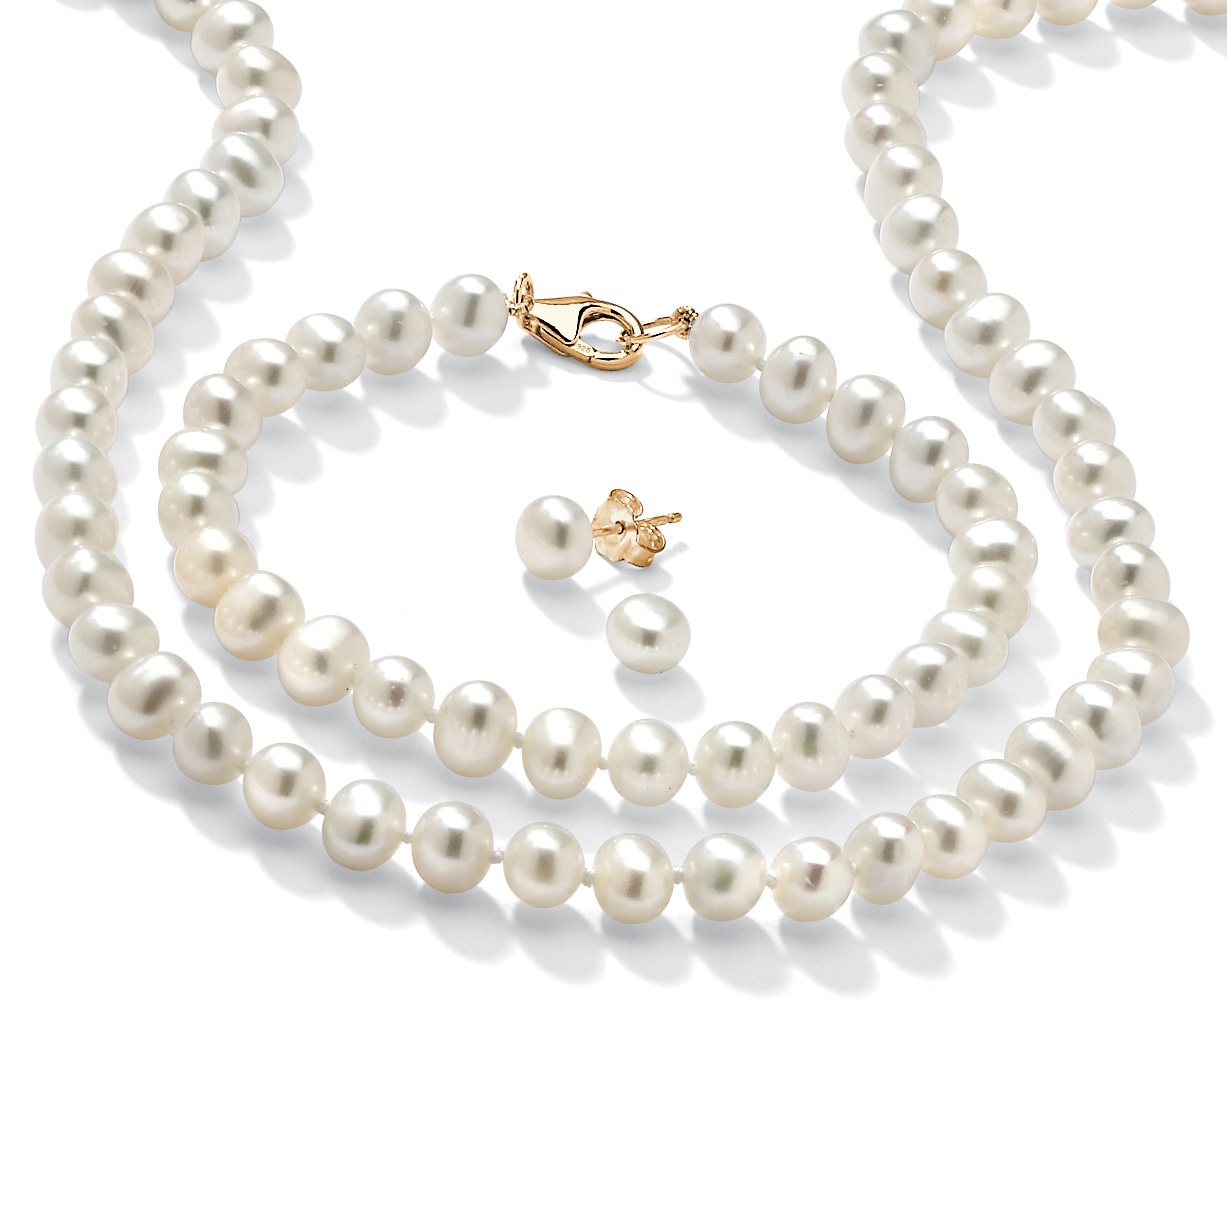 Genuine Cultured Freshwater Pearl 3-Piece Jewelry Set in 14k Gold over ...